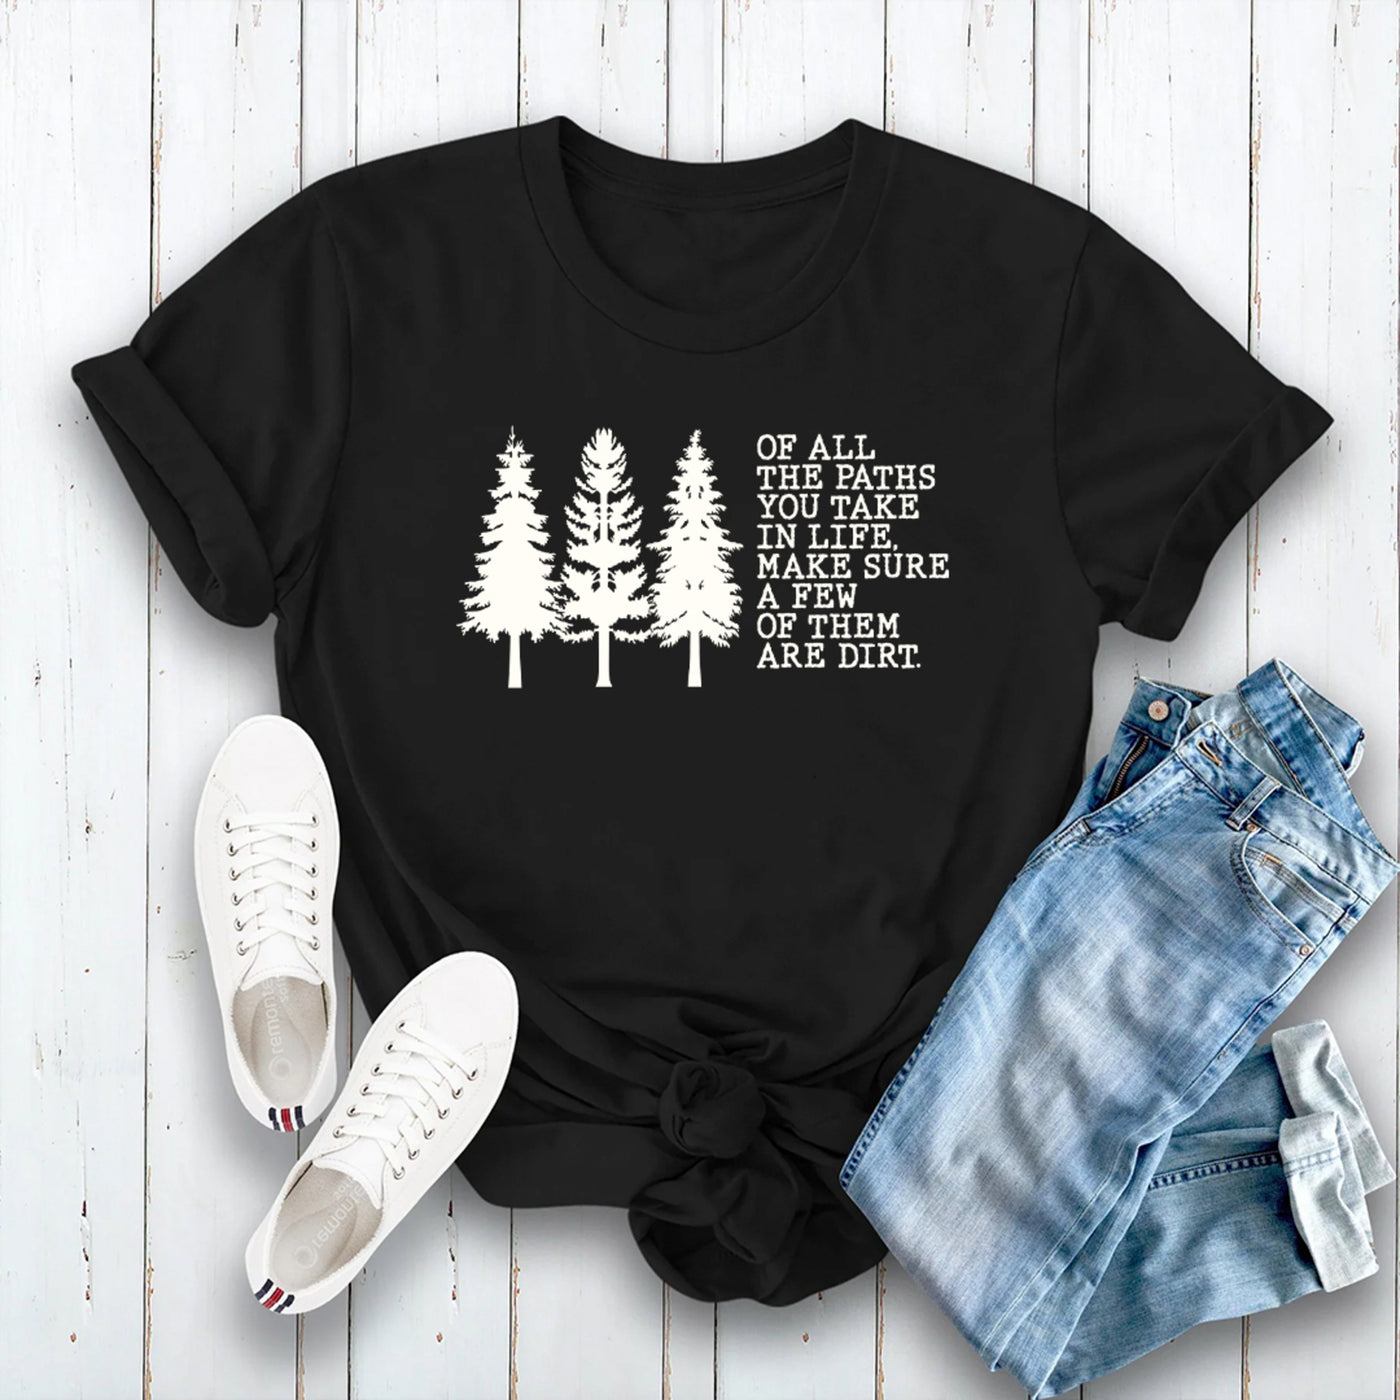 Paths in Life T-Shirt